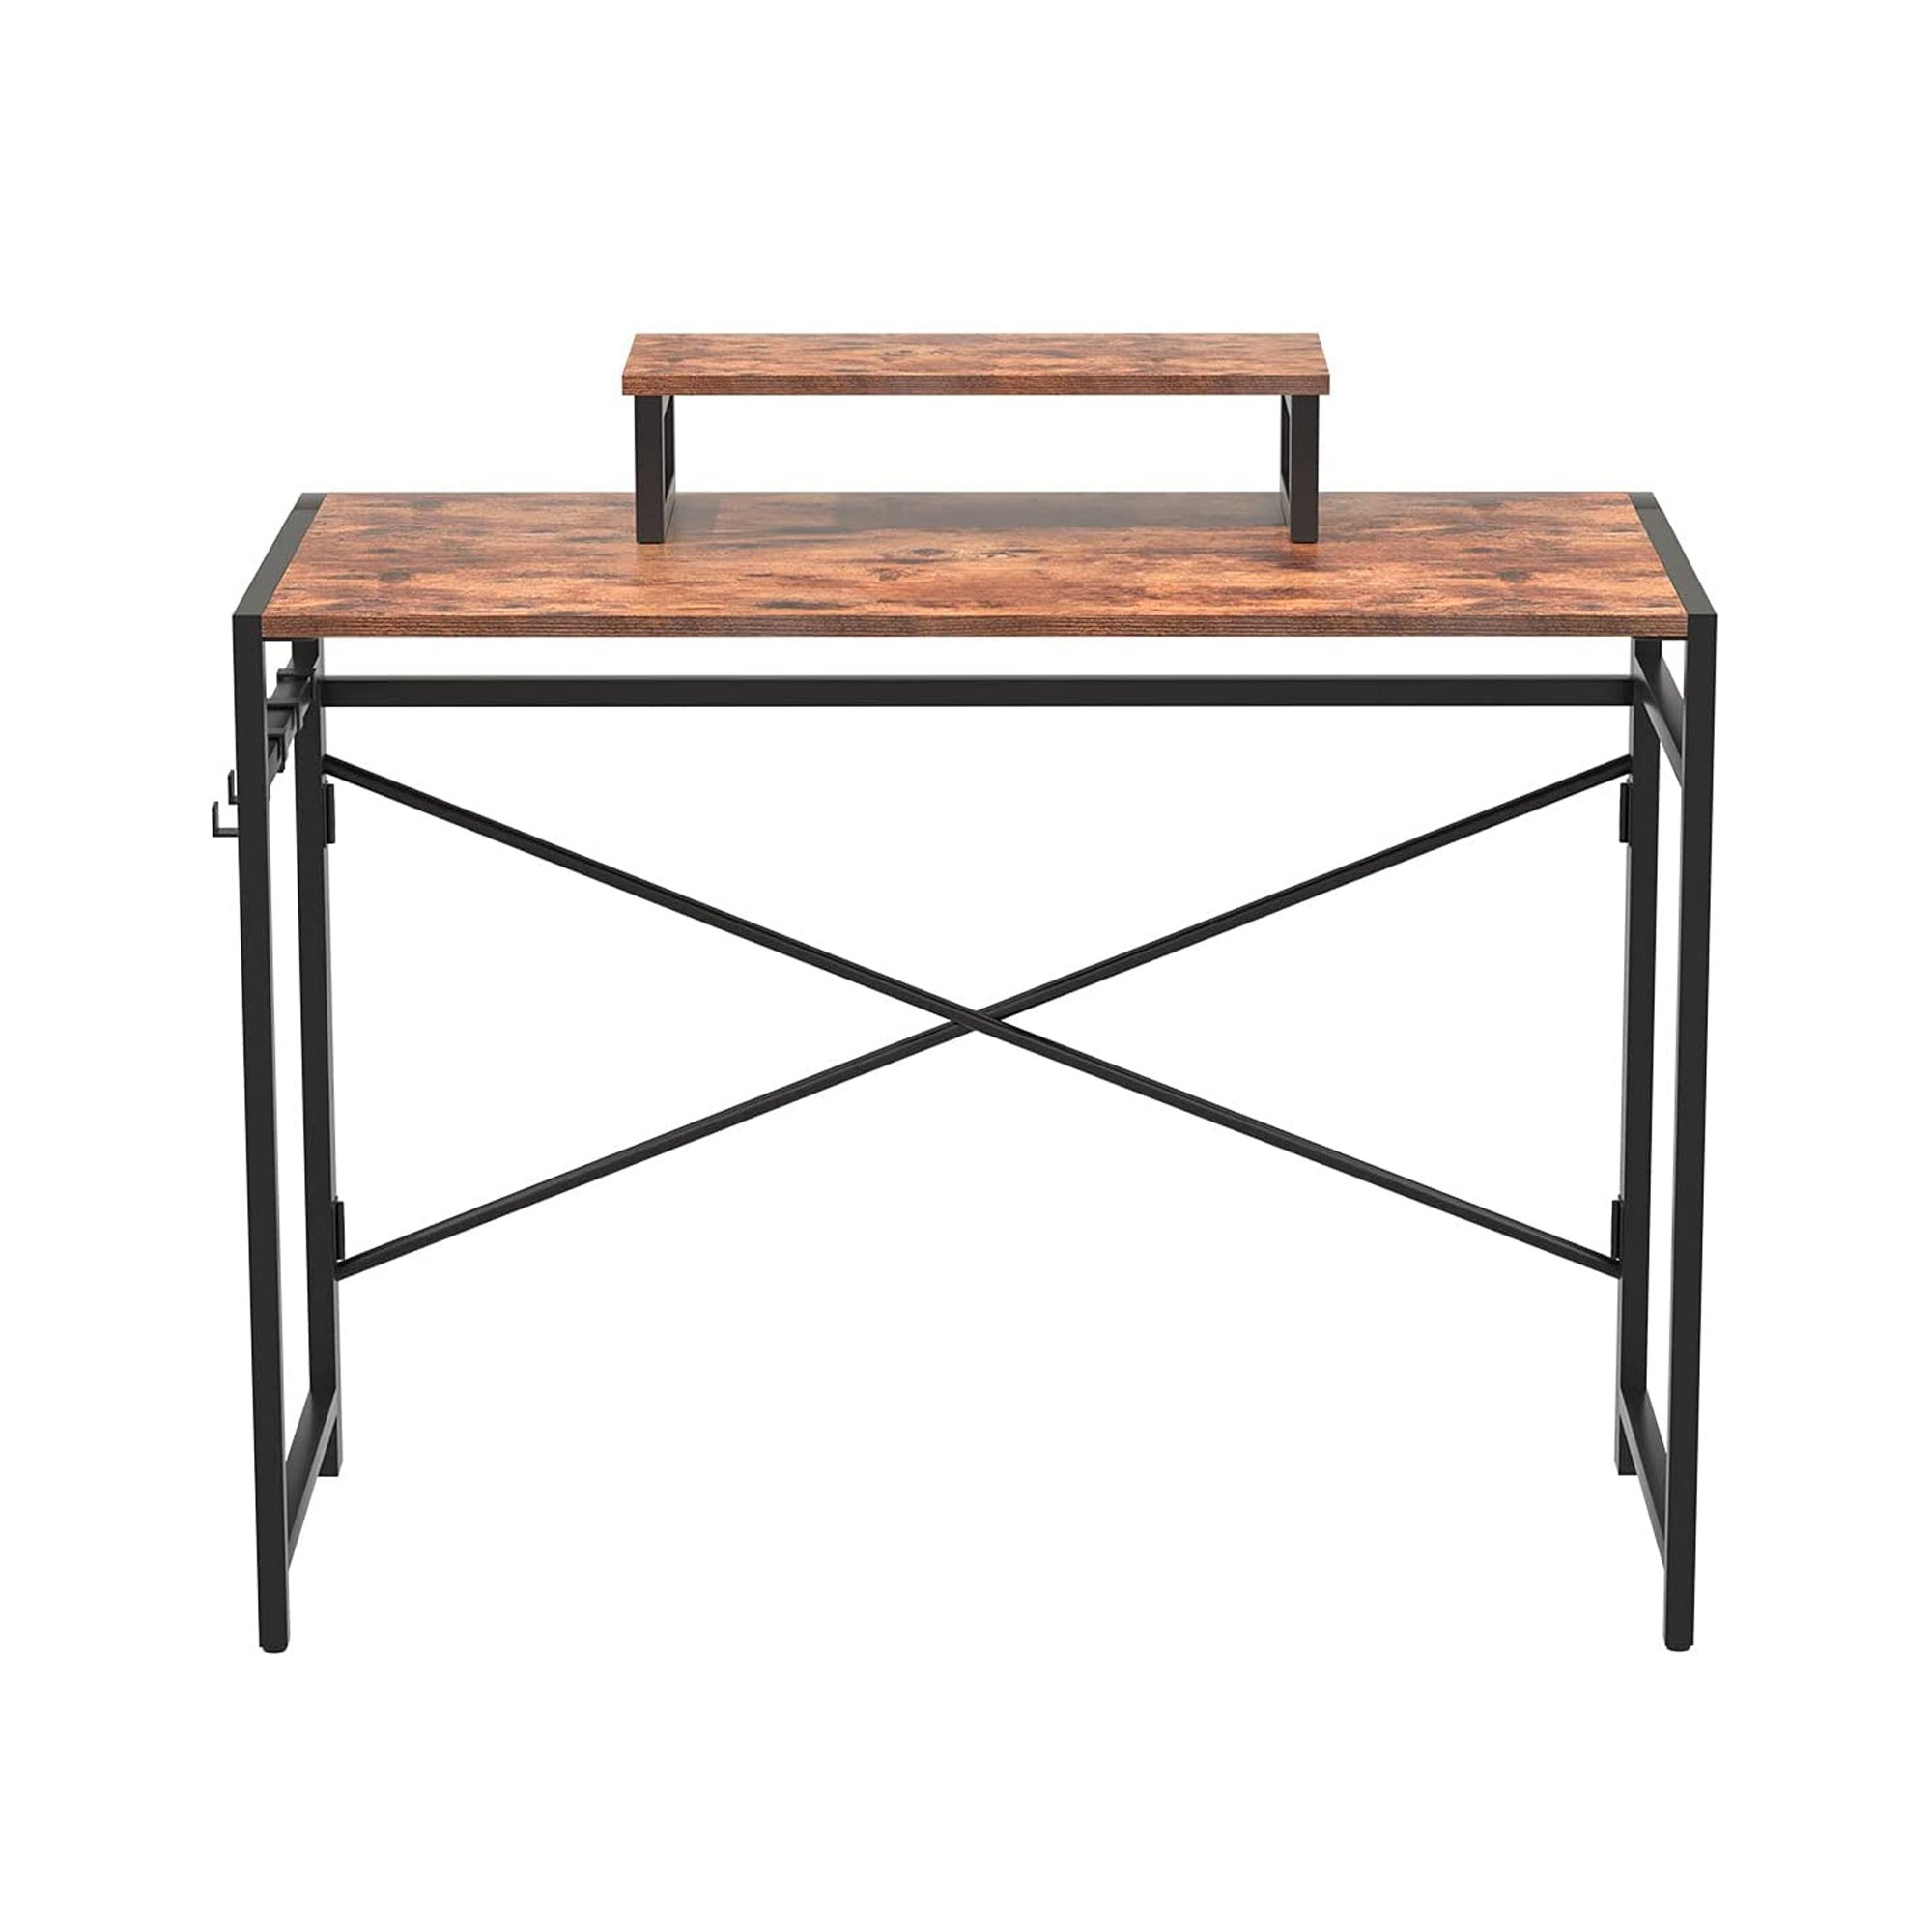 Folding Desk No Need to Assemble 55” Desk, with Monitor Lifter and 3 Hooks (Brown)-CASAINC